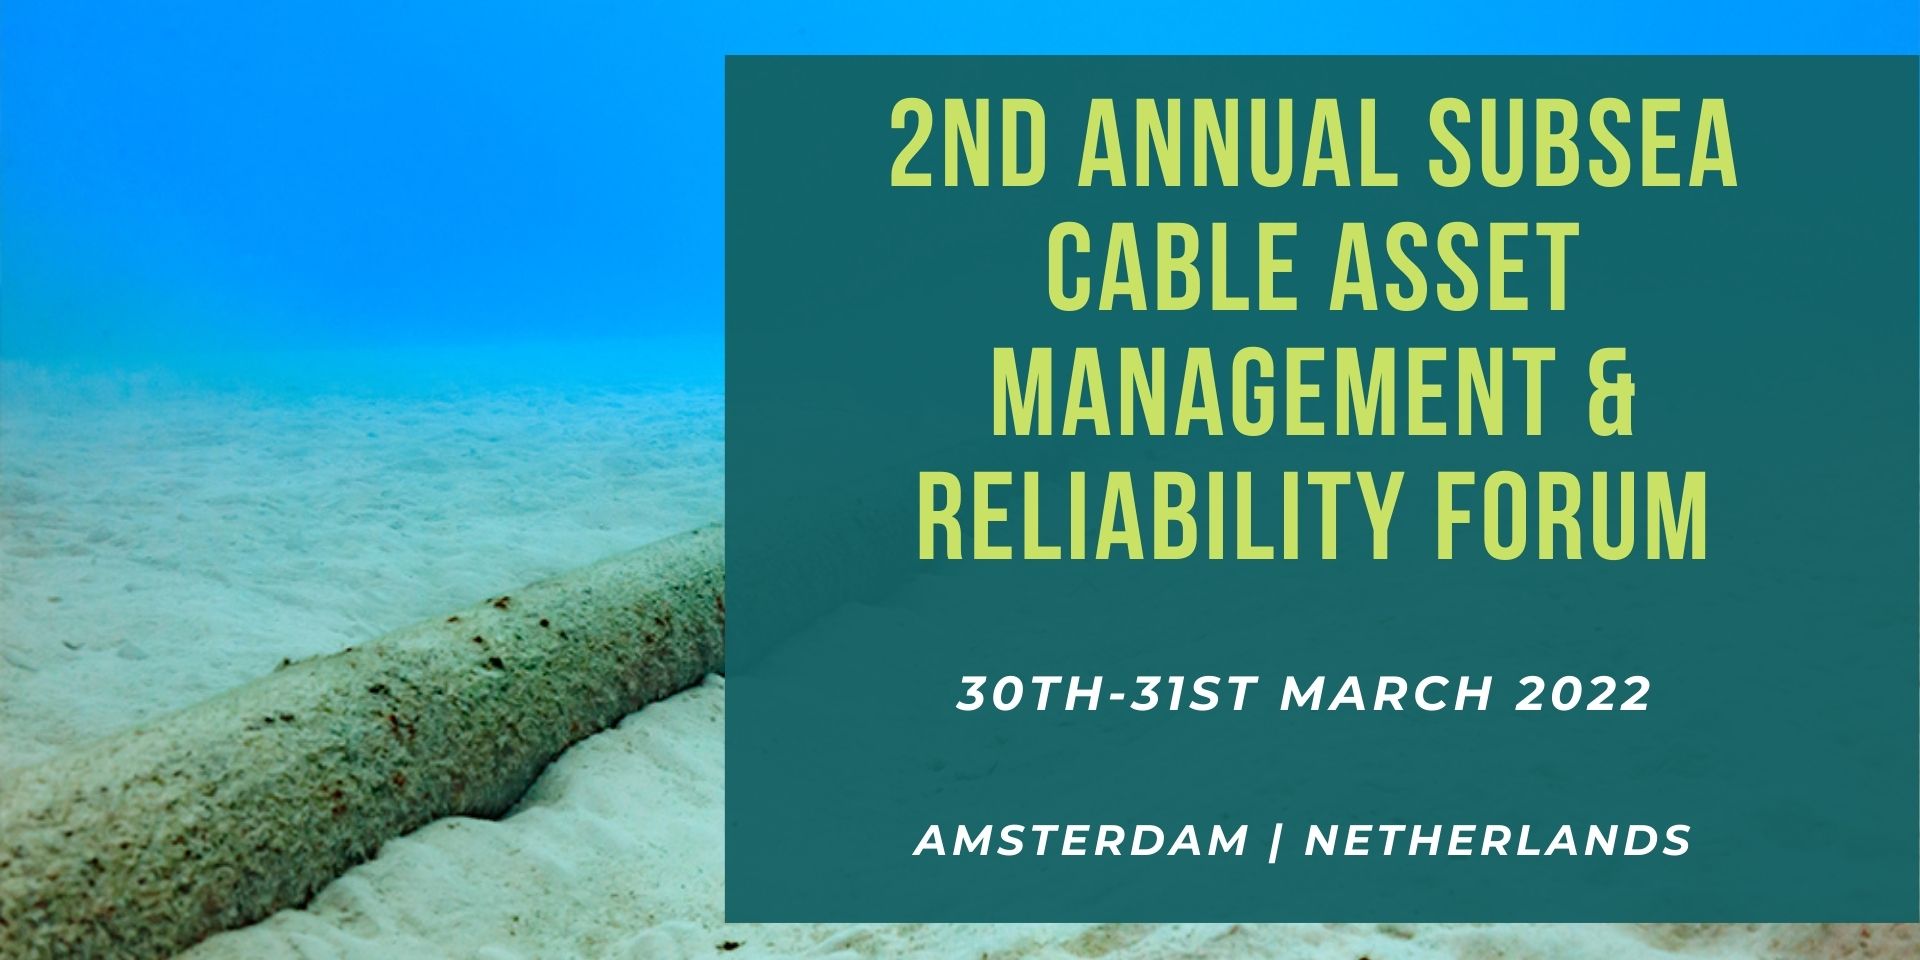 2nd Annual Subsea Cable Asset Management and Reliability Forum organized by Leadvent Group